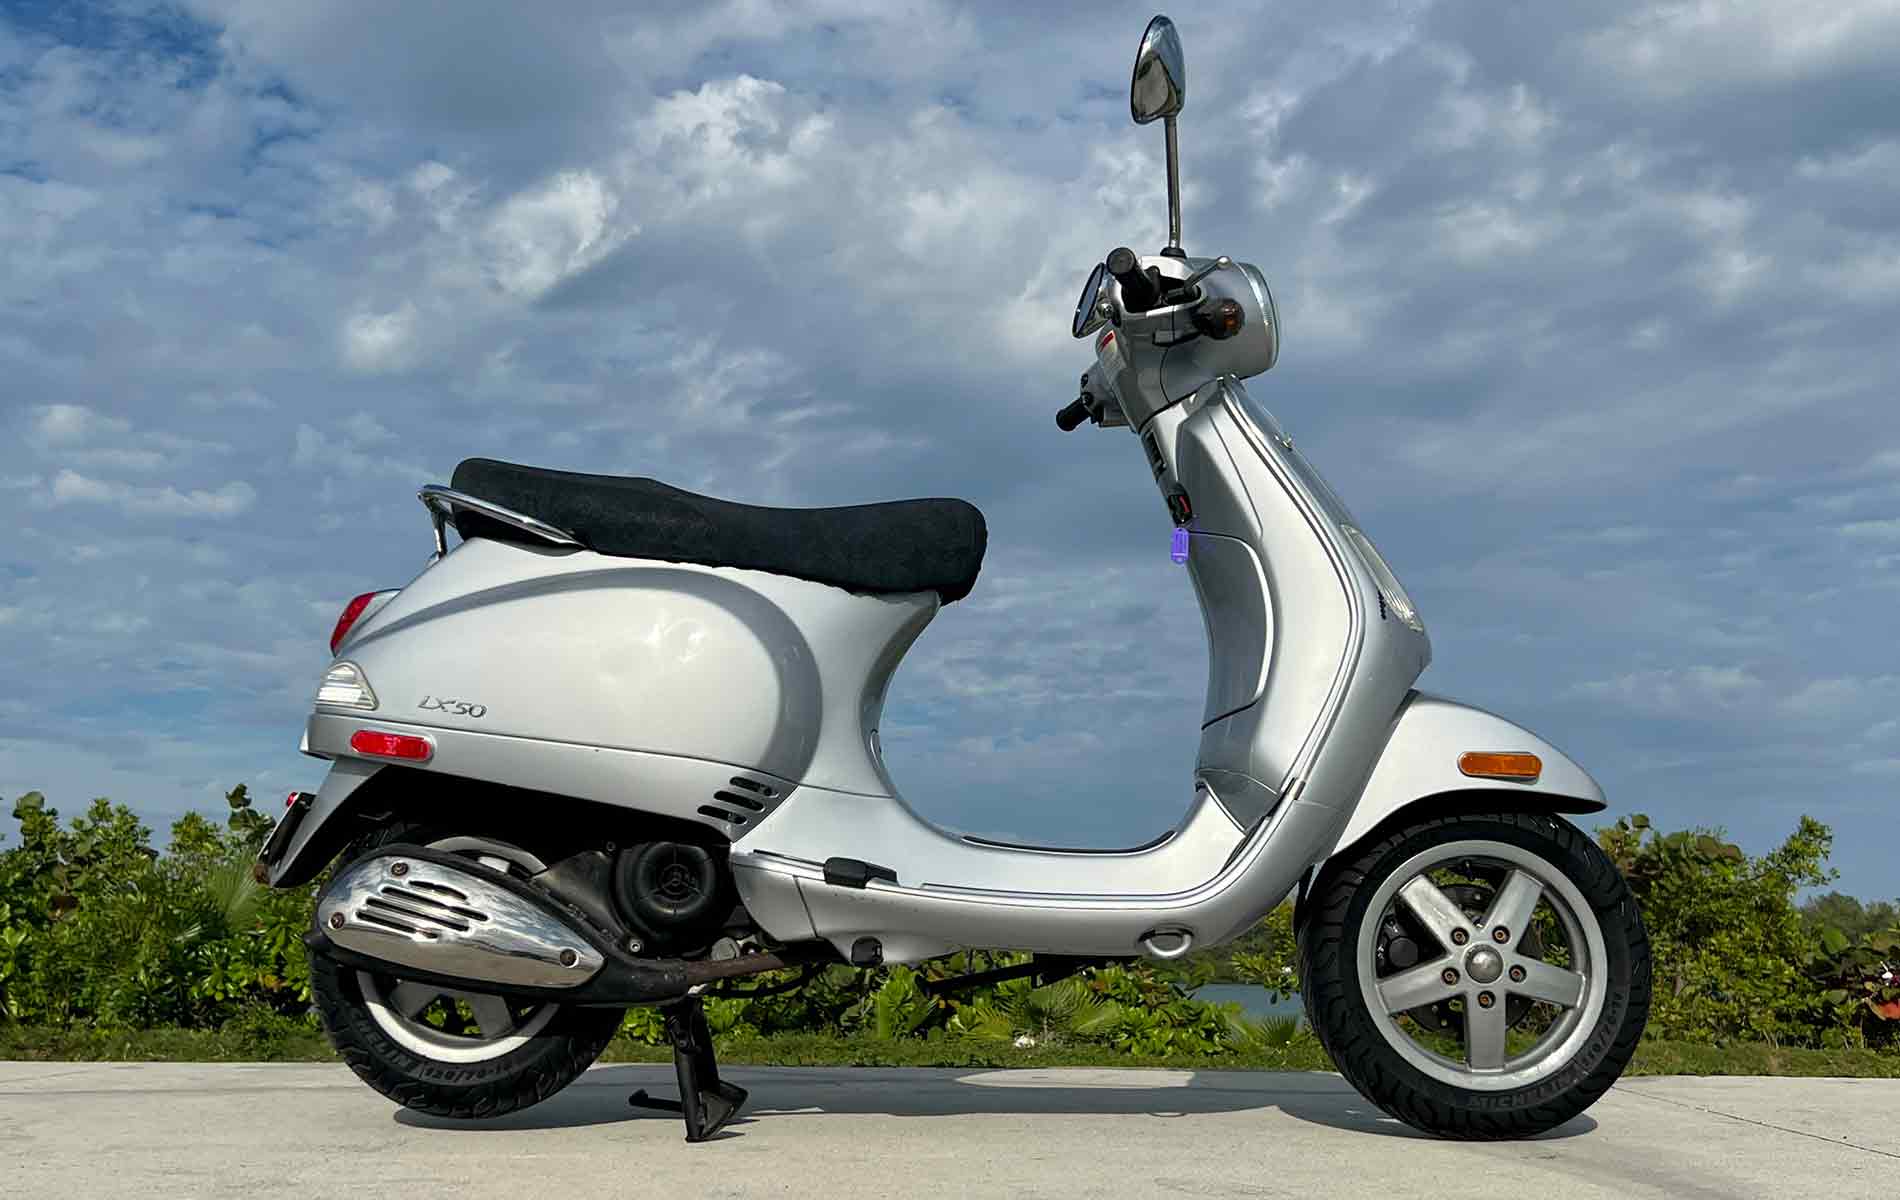 rent-a-vespa-lx-50cc-motorcycle-silver-right-side